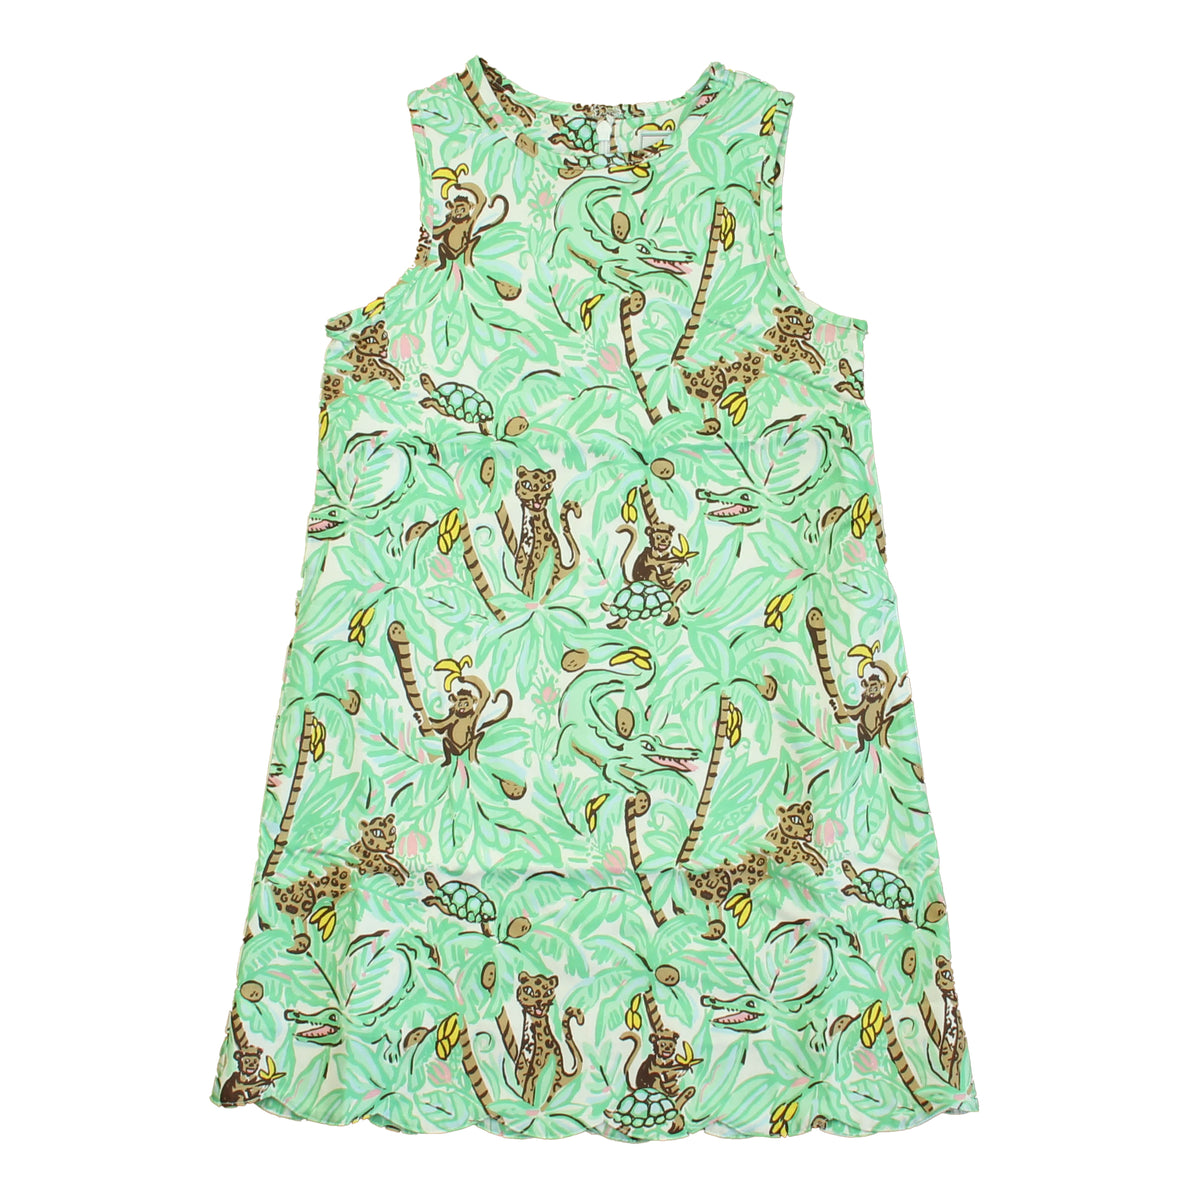 New with Tags: Jaguar Jungle Dress size: 6-14 Years -- FINAL SALE